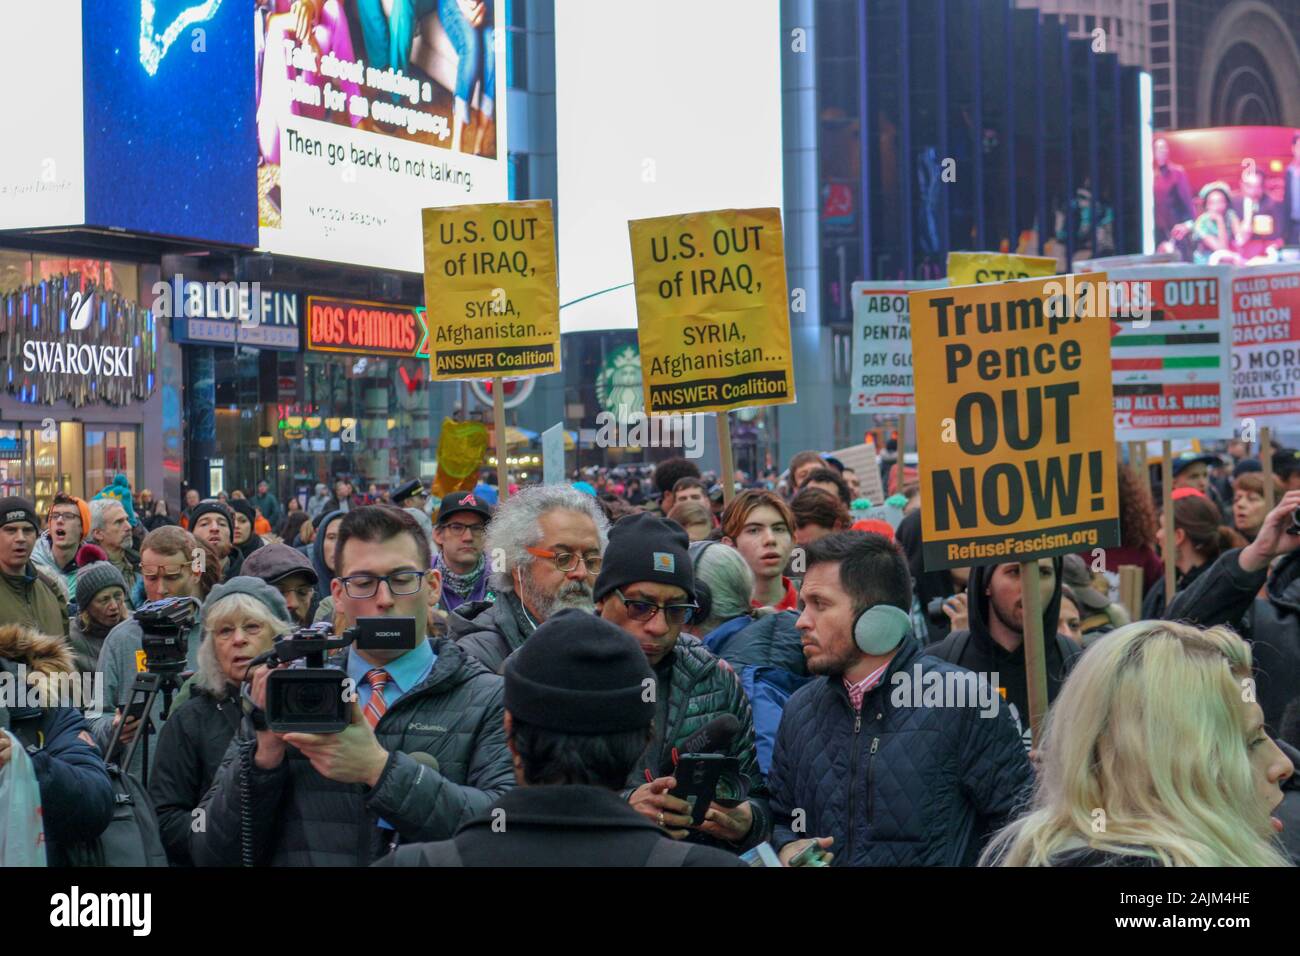 New York, NY – January 04, 2020: Hundreds of people gathered in Times Square in New York City to protest war against Iran & Iraq on January 4th 2020. Stock Photo